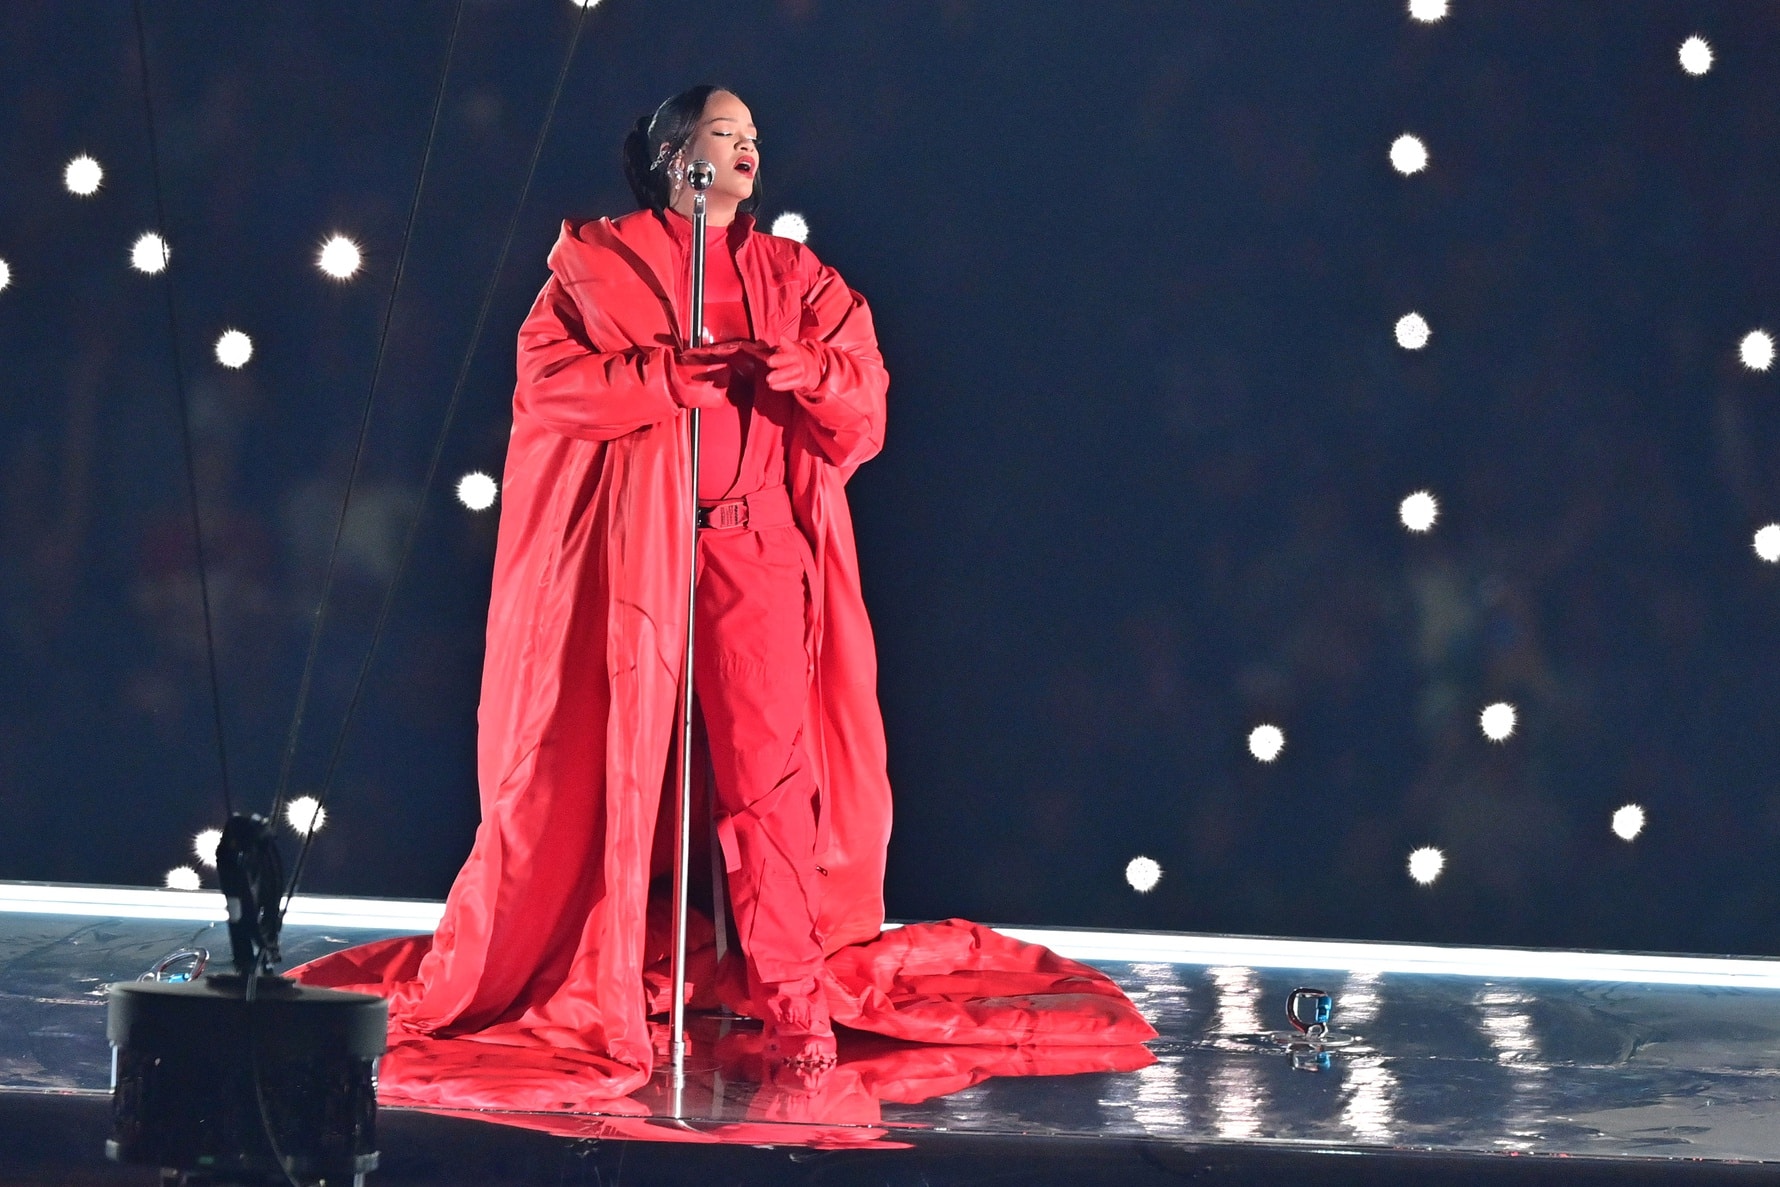 Sod-Gate: Rihanna Rehearsals and NFL Greed Caused Slippery Super Bowl Field